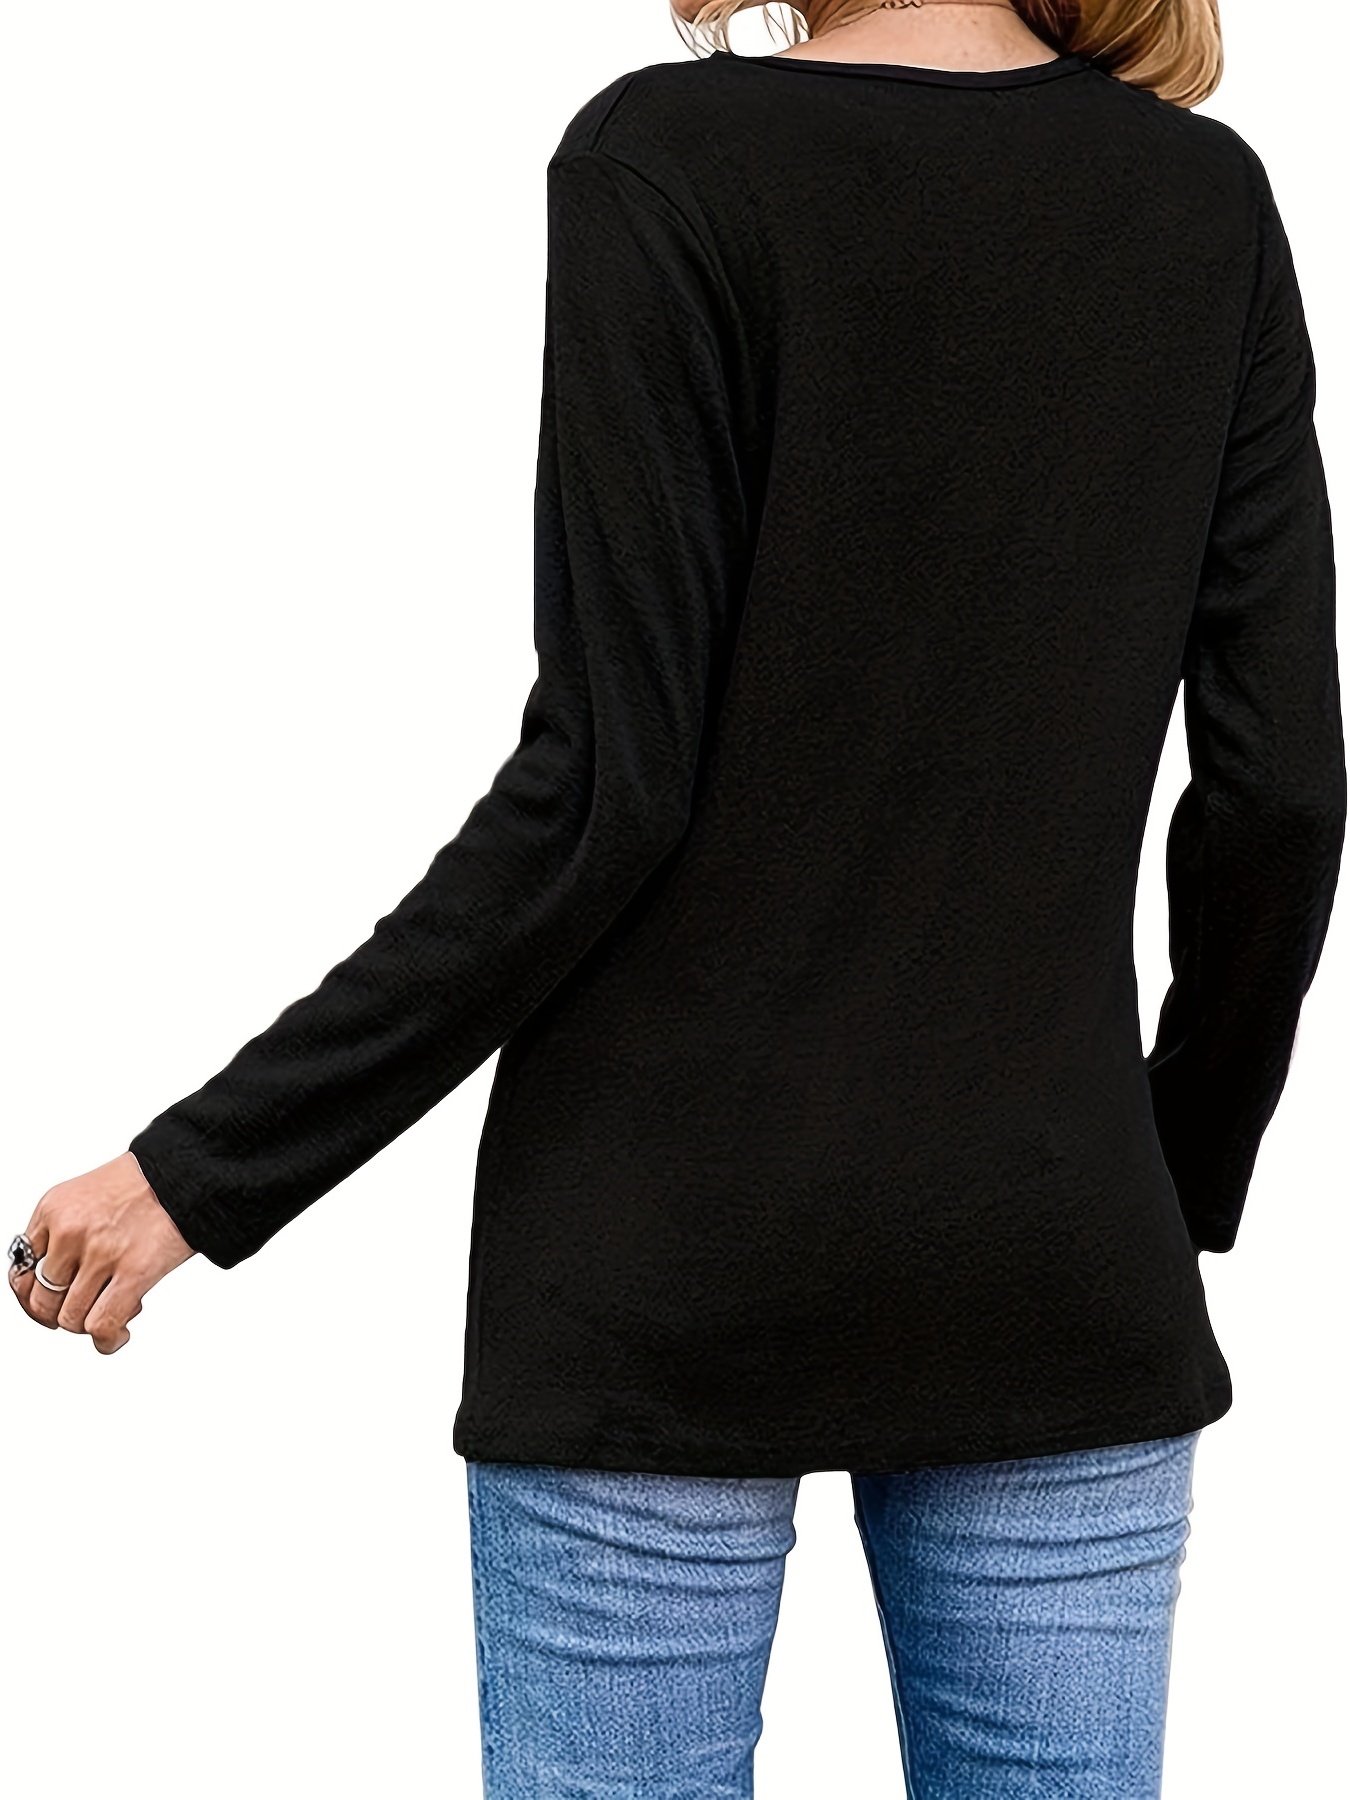 CYMMPU Casual Asymmetrical Hem Shirts for Women Solid Color Fall Batwing  Sleeve Crewneck T-Tops Slouchy Blouses Tee Tops Black